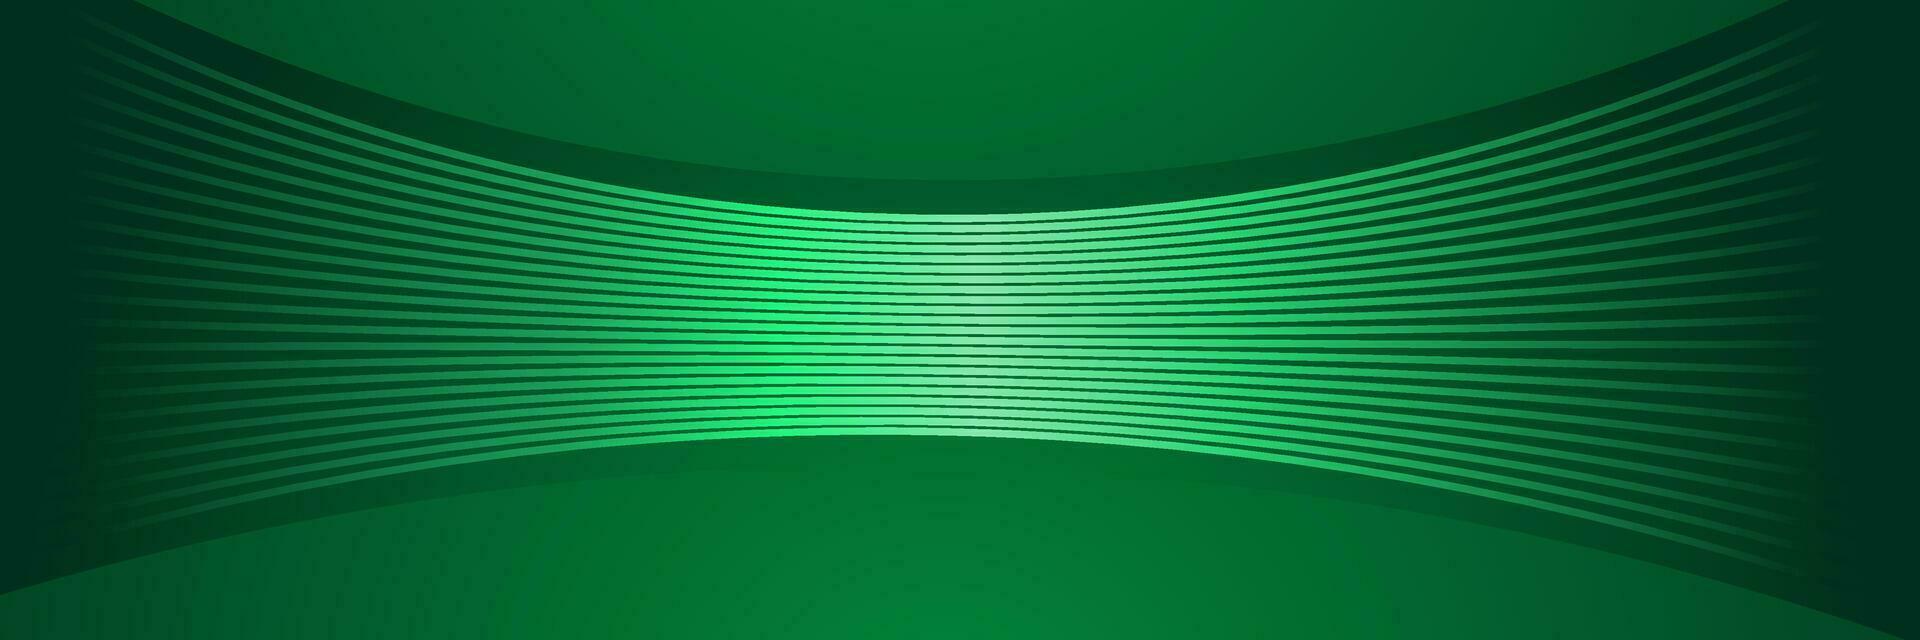 abstract business dark green wave background with glowing lines vector